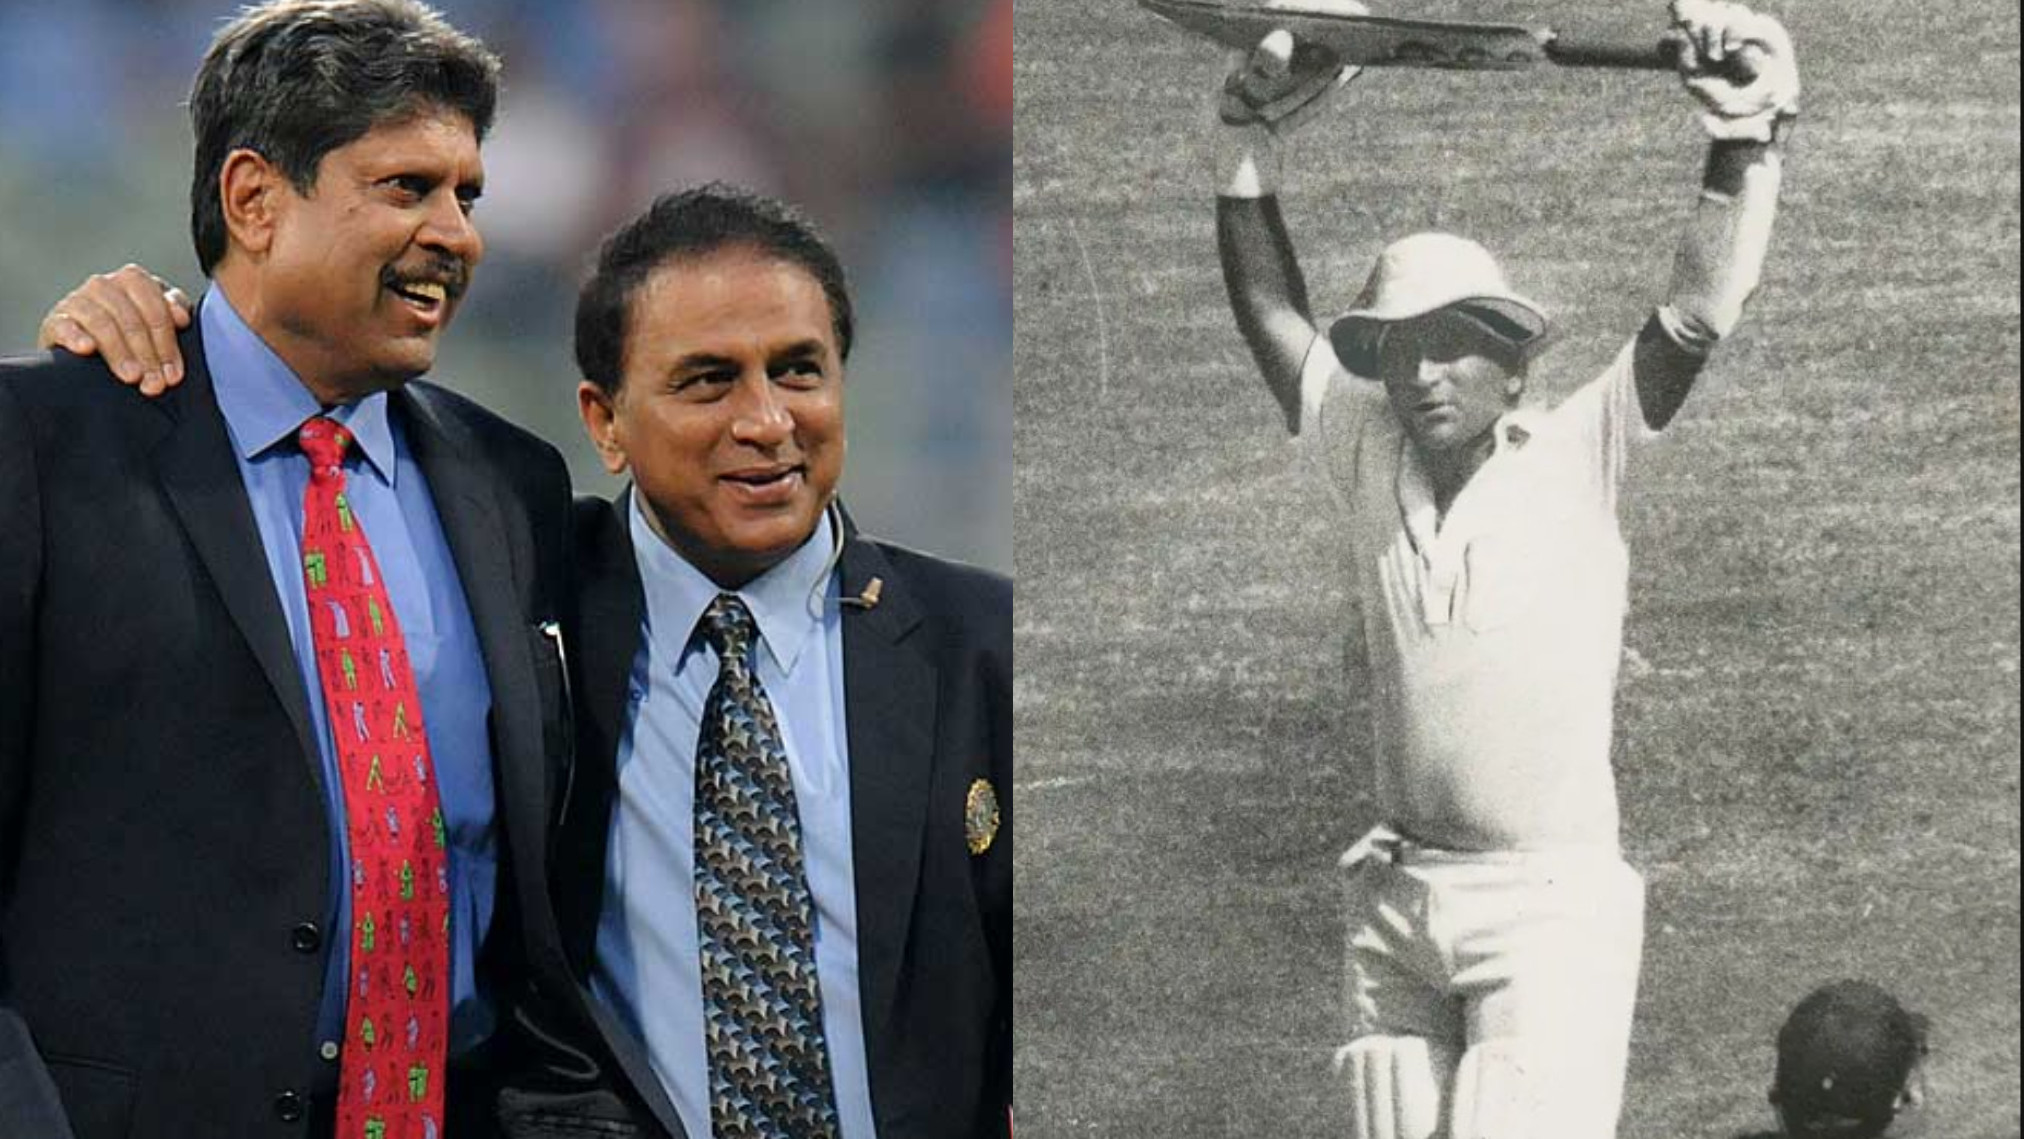 Kapil managed to get champagne in a dry state- Gavaskar recalls his magical moment of reaching 10,000 Test runs